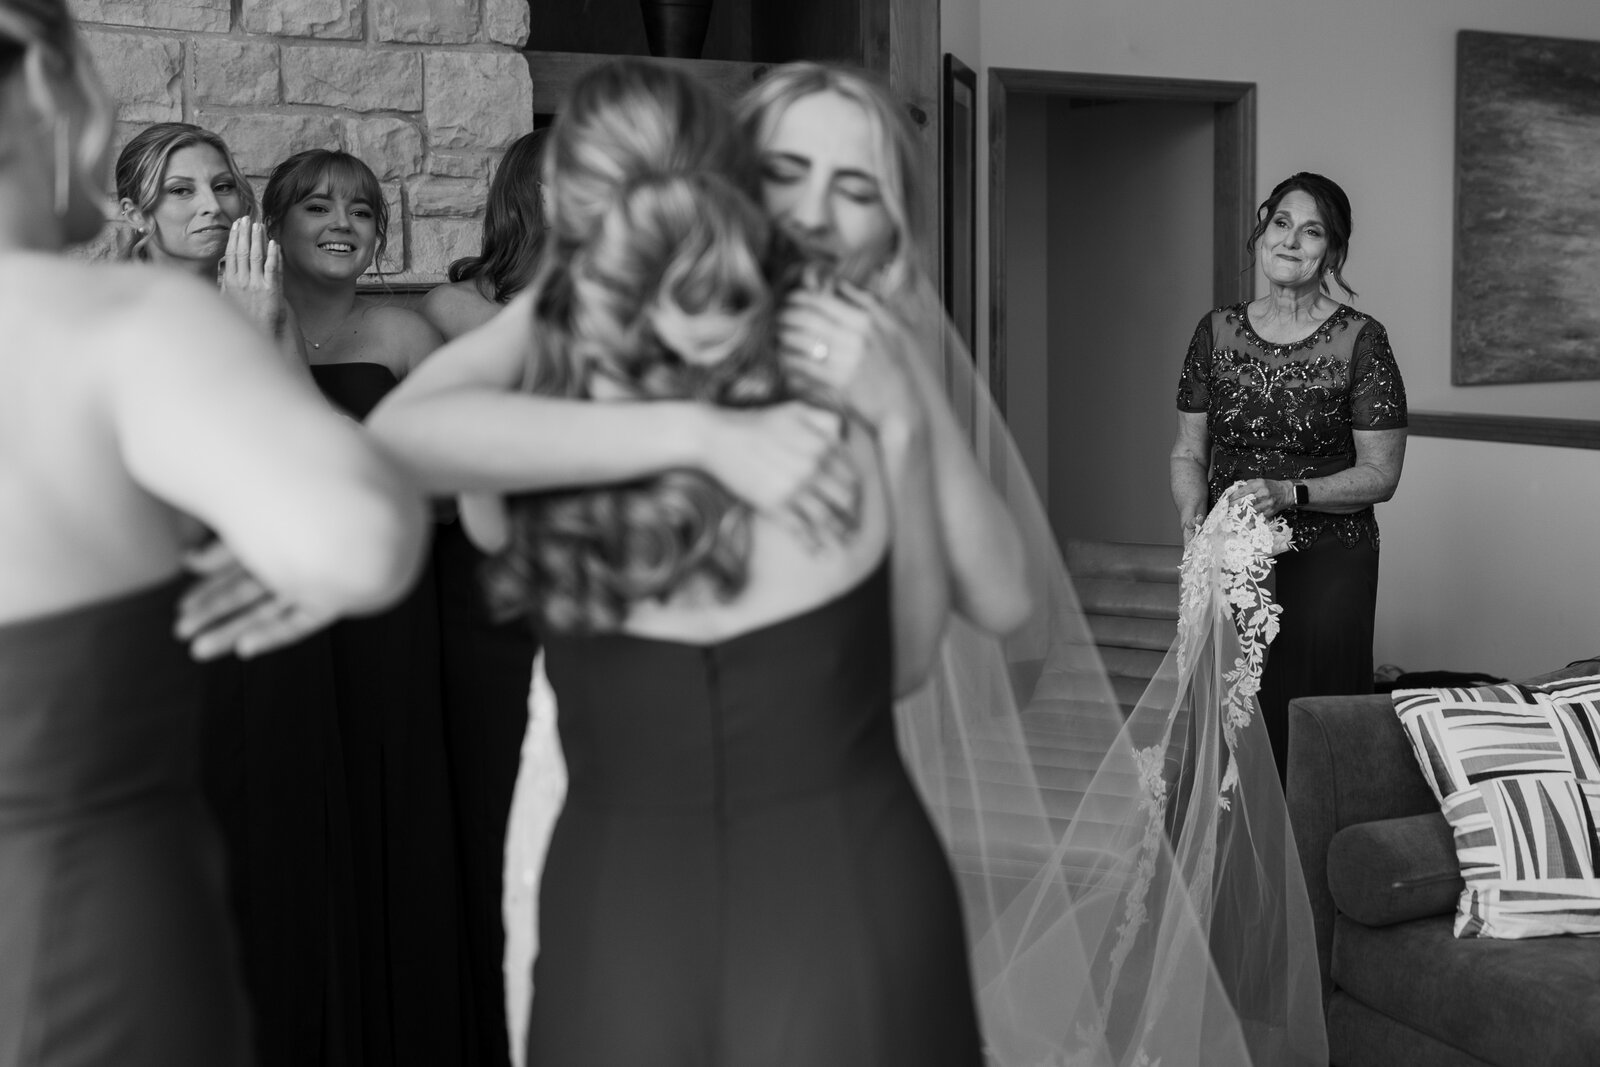 Mother of bride looking happy while bride giving hugs